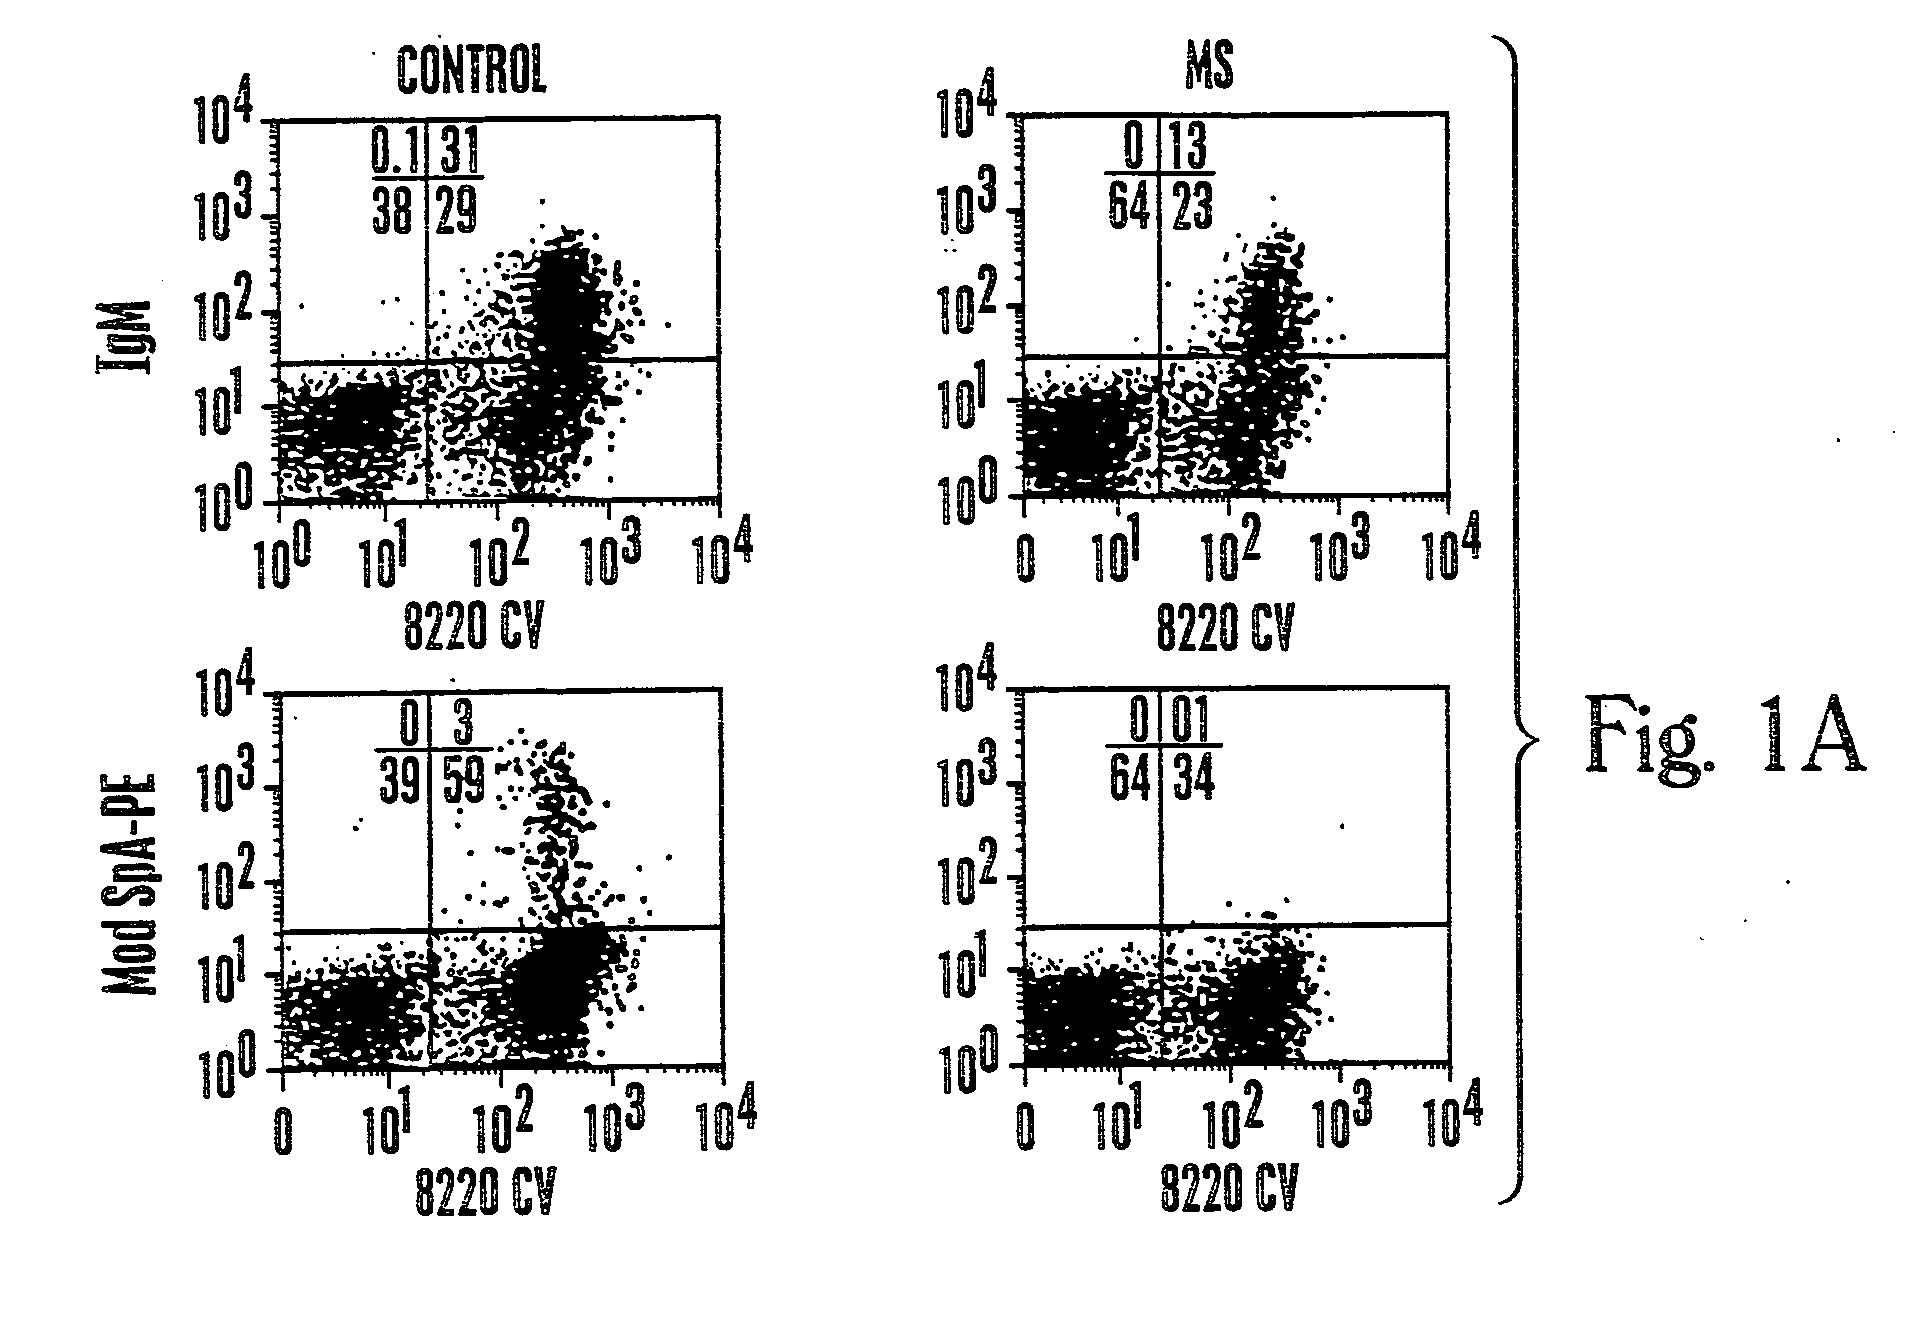 Protein a based binding domains with desirable activities